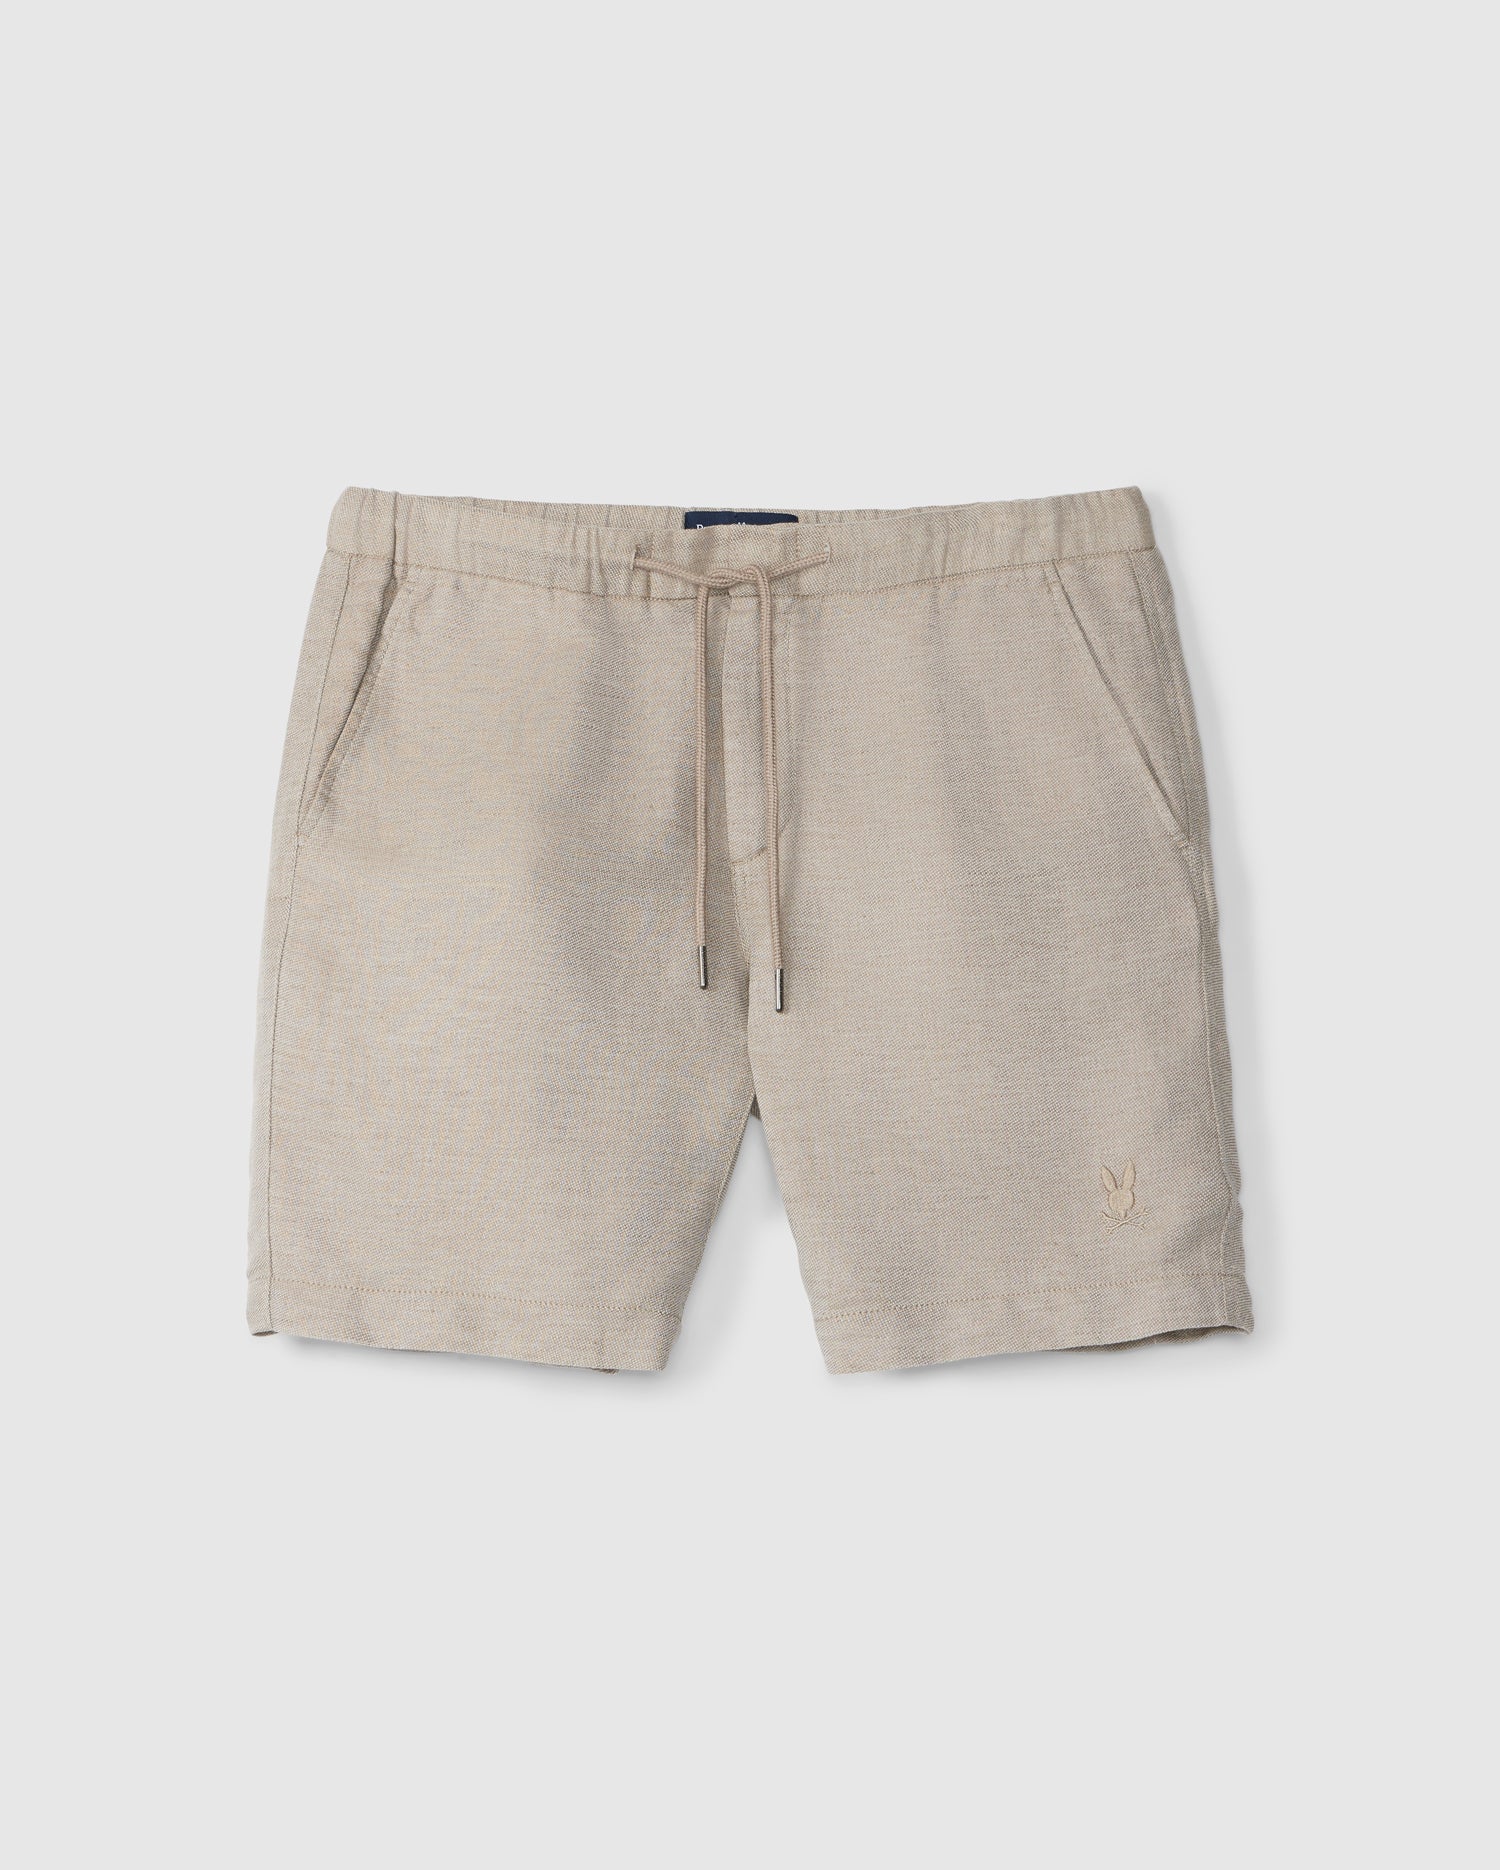 A pair of Psycho Bunny MENS WINDCREST LINEN SHORT - B6R474C200 made from a breathable linen-cotton blend, displayed on a white background, featuring a small embroidered emblem on the left thigh.